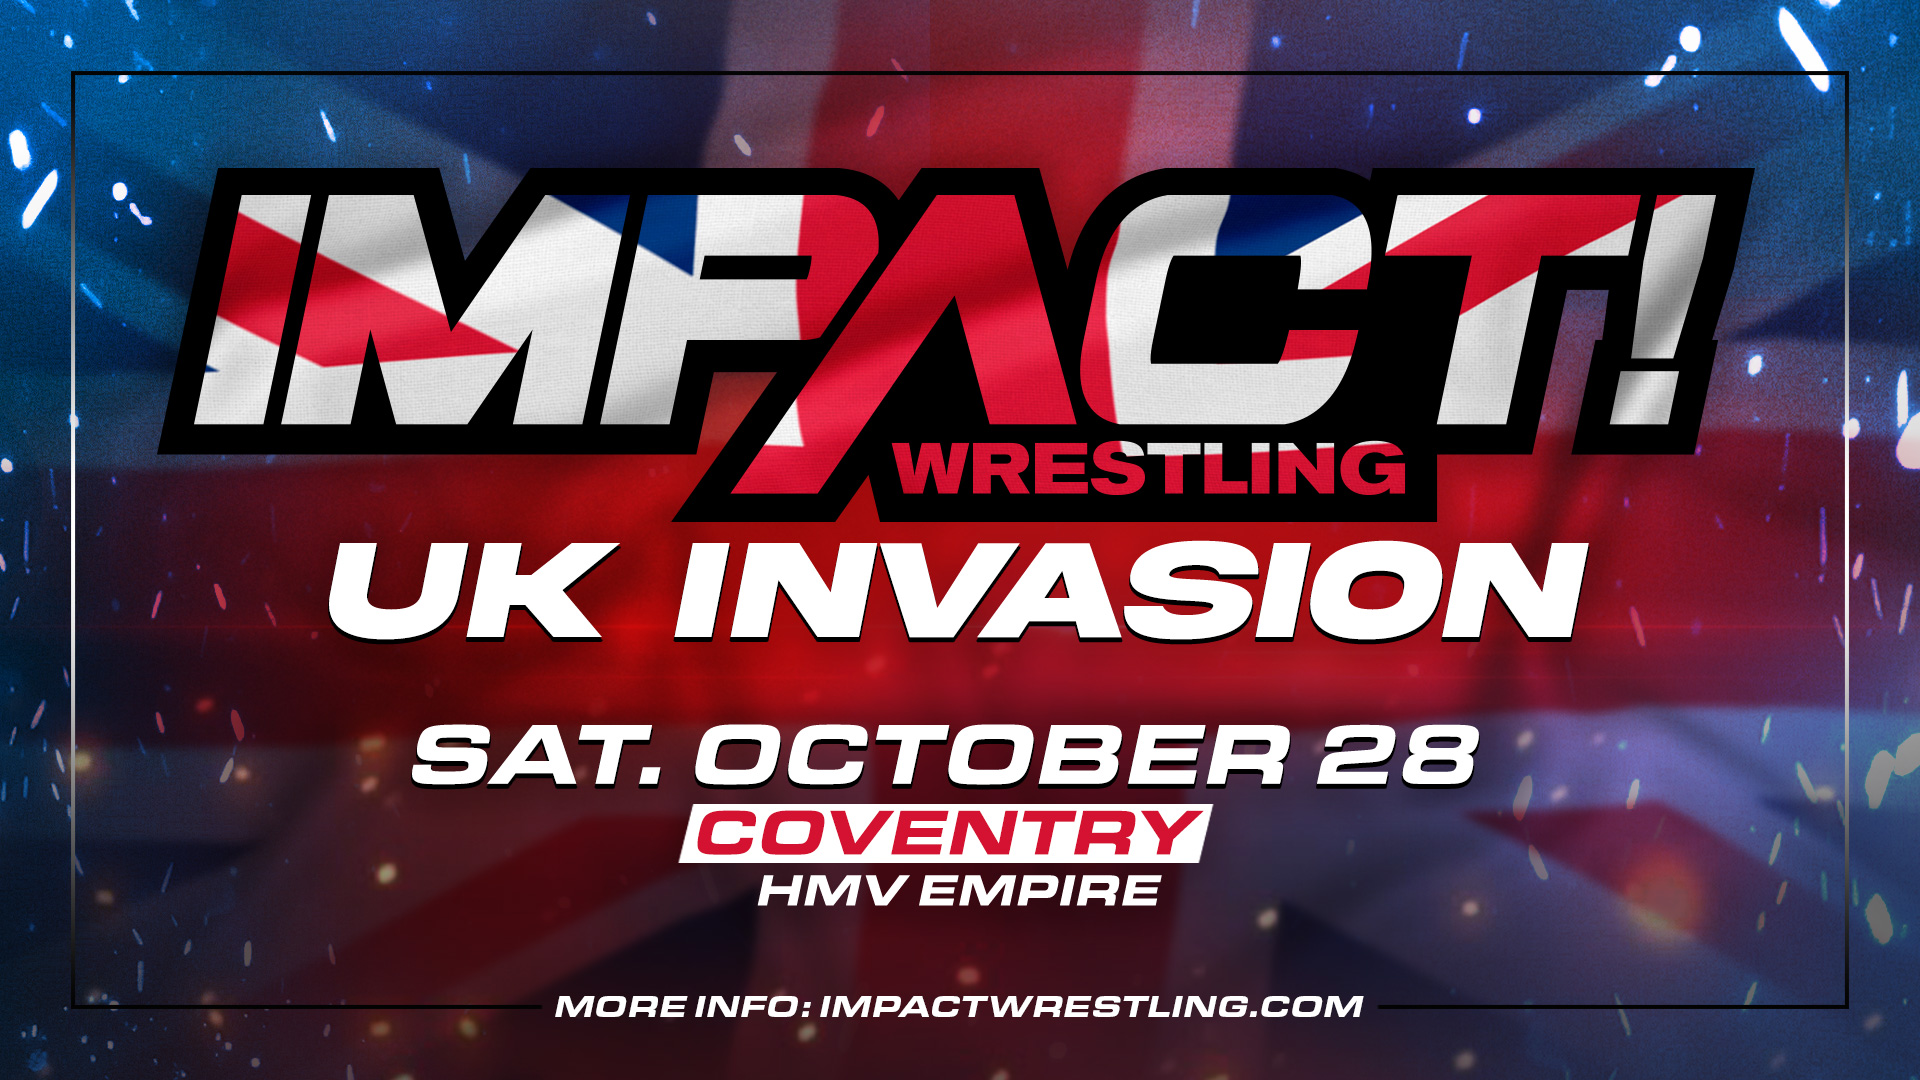 Preview the Lineup for the UK Invasion Tour LIVE October 28th in Coventry – IMPACT Wrestling